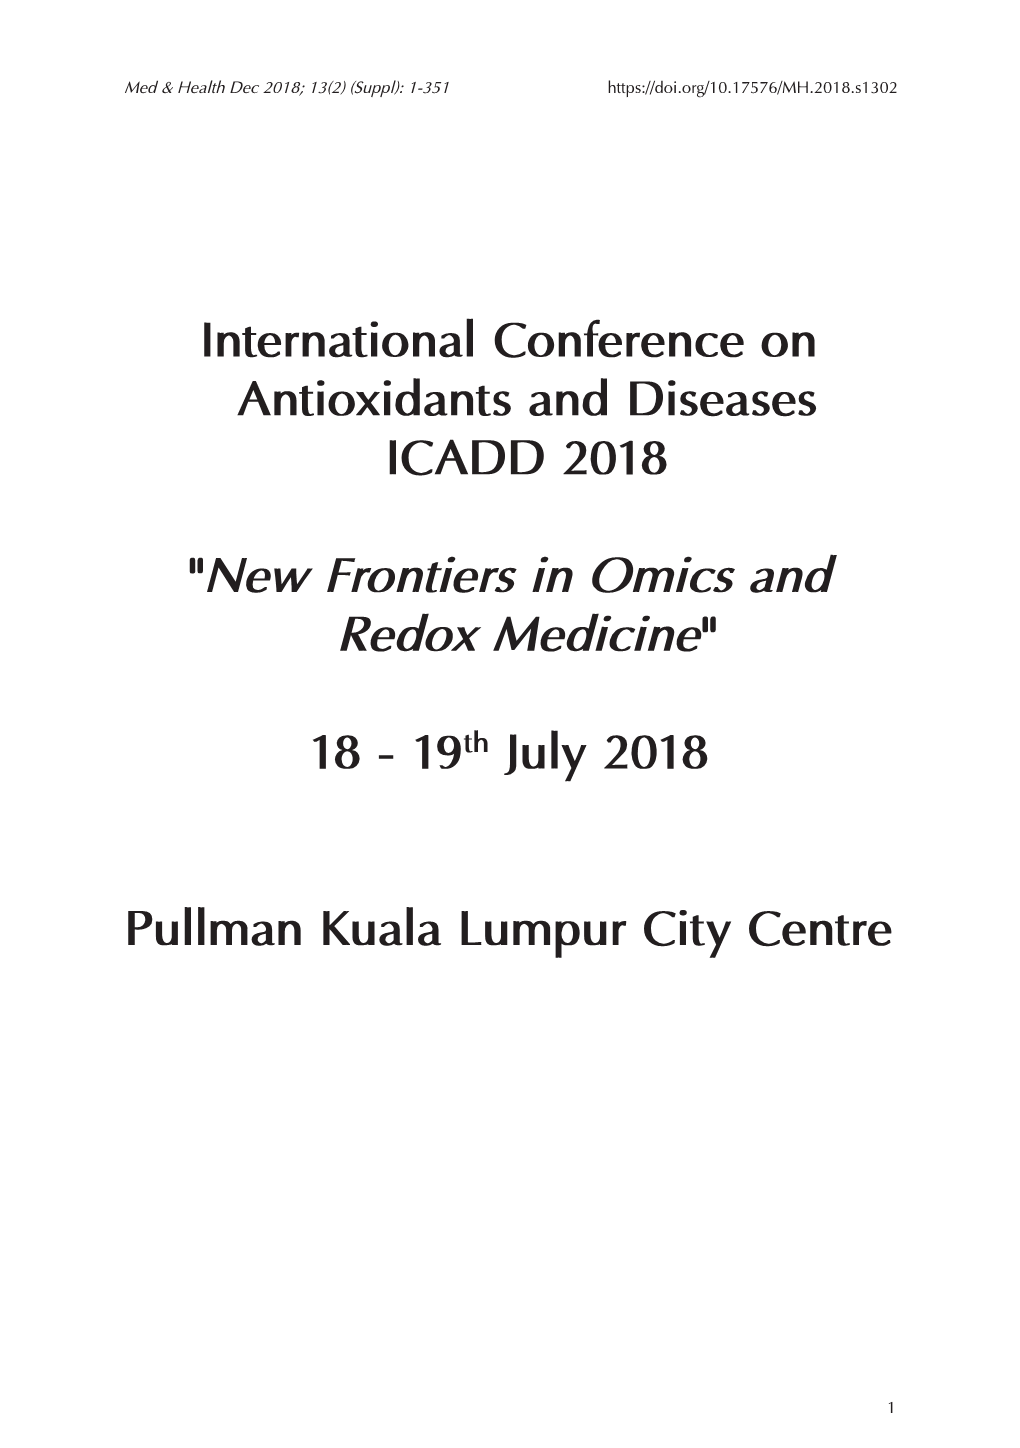 International Conference on Antioxidants and Diseases ICADD 2018